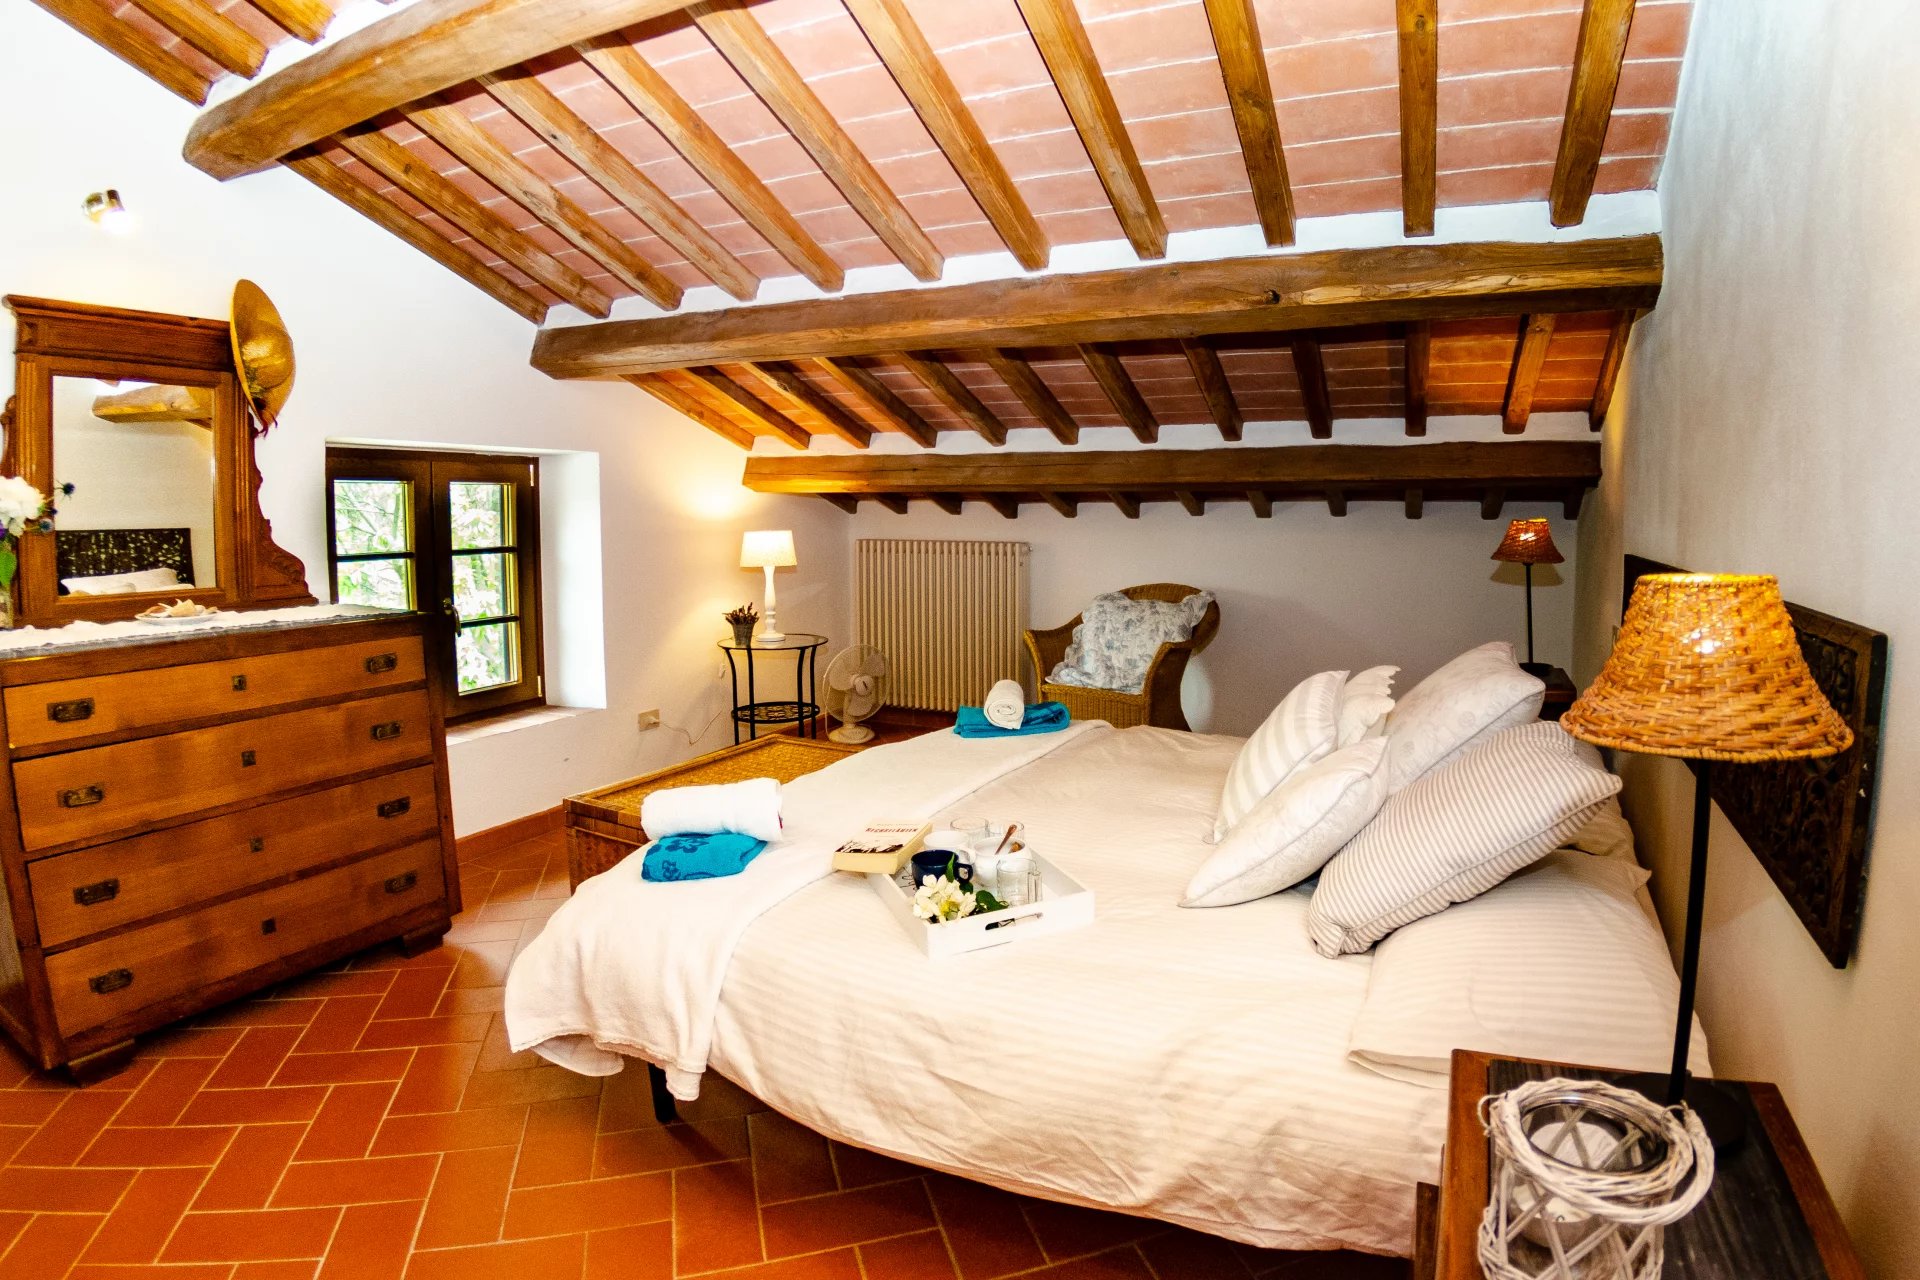 ITALY, TUSCANY, LUCCA, FARMHOUSE WITH POOL, FOR 6 PERSONS